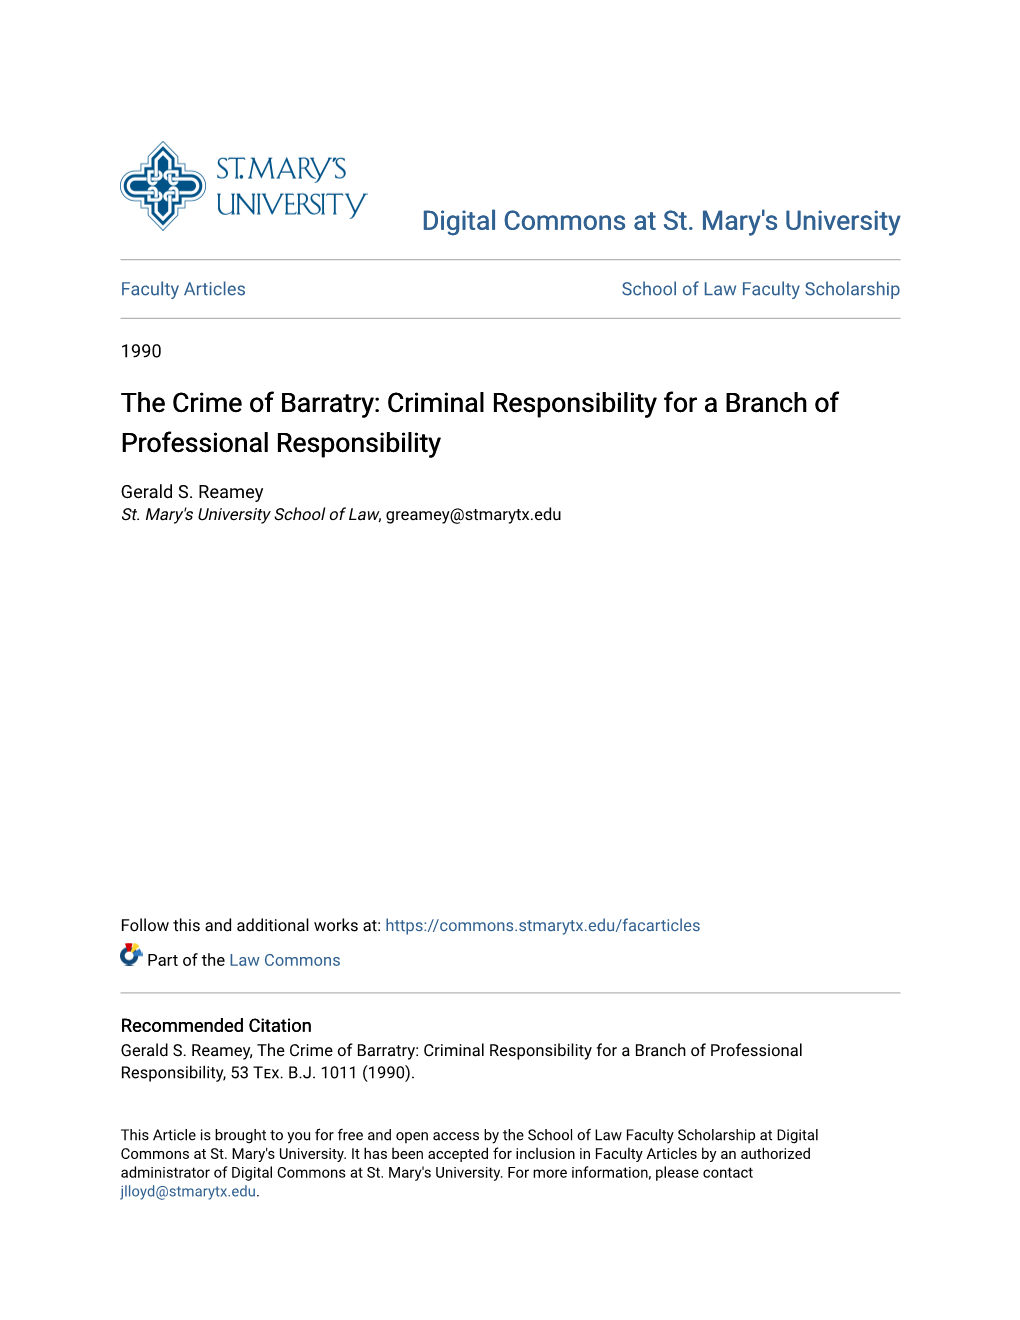 The Crime of Barratry: Criminal Responsibility for a Branch of Professional Responsibility